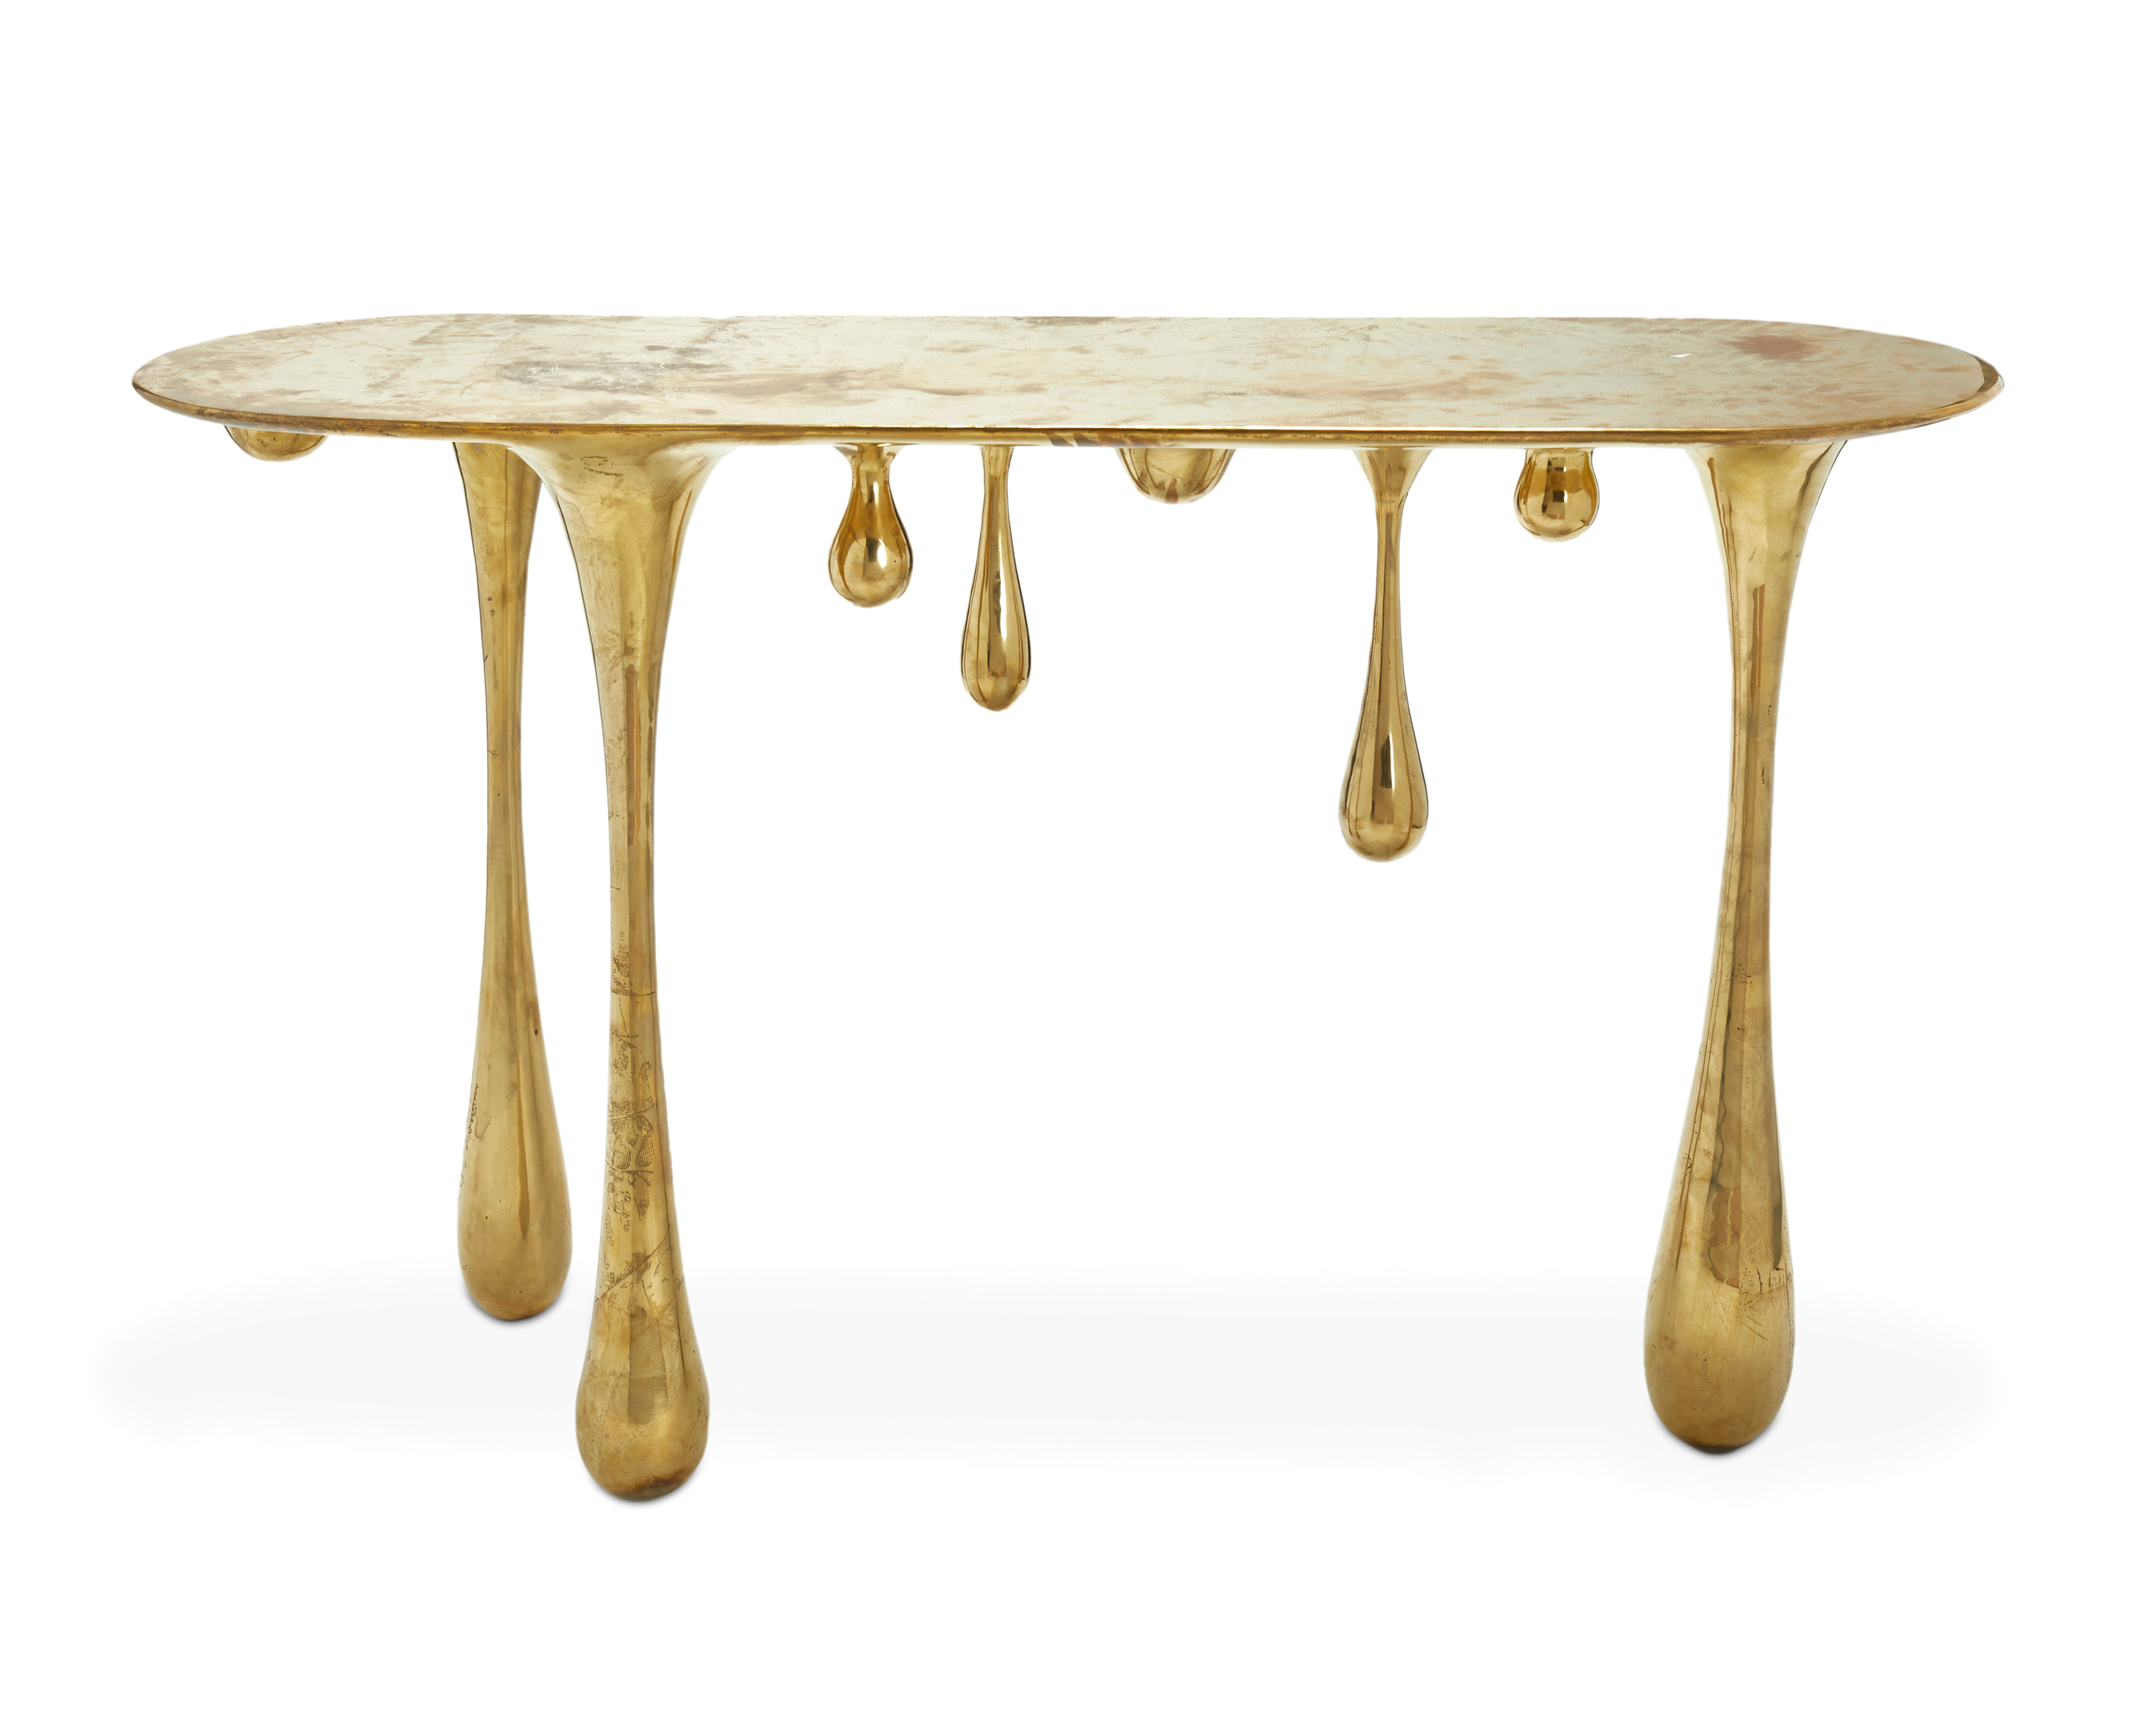 Dripping brass console table by Zhipeng Tan, $16,250